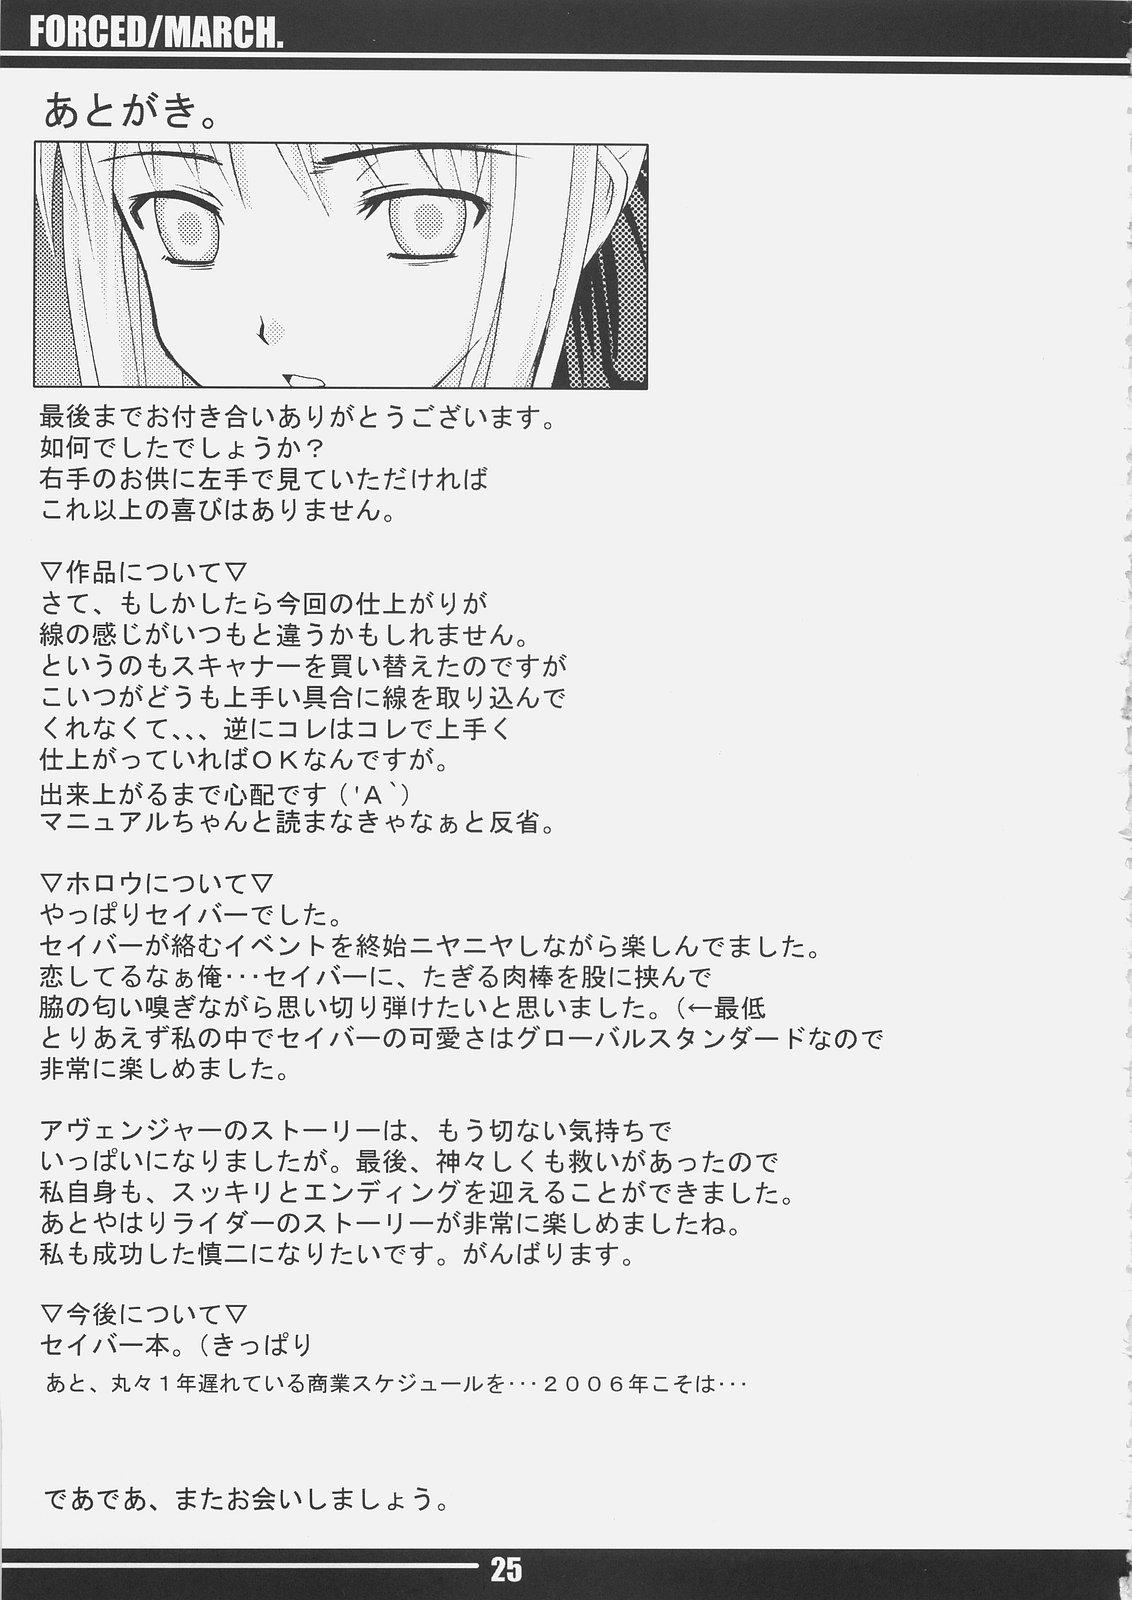 Blacks Forced/March. - Fate stay night Esposa - Page 24